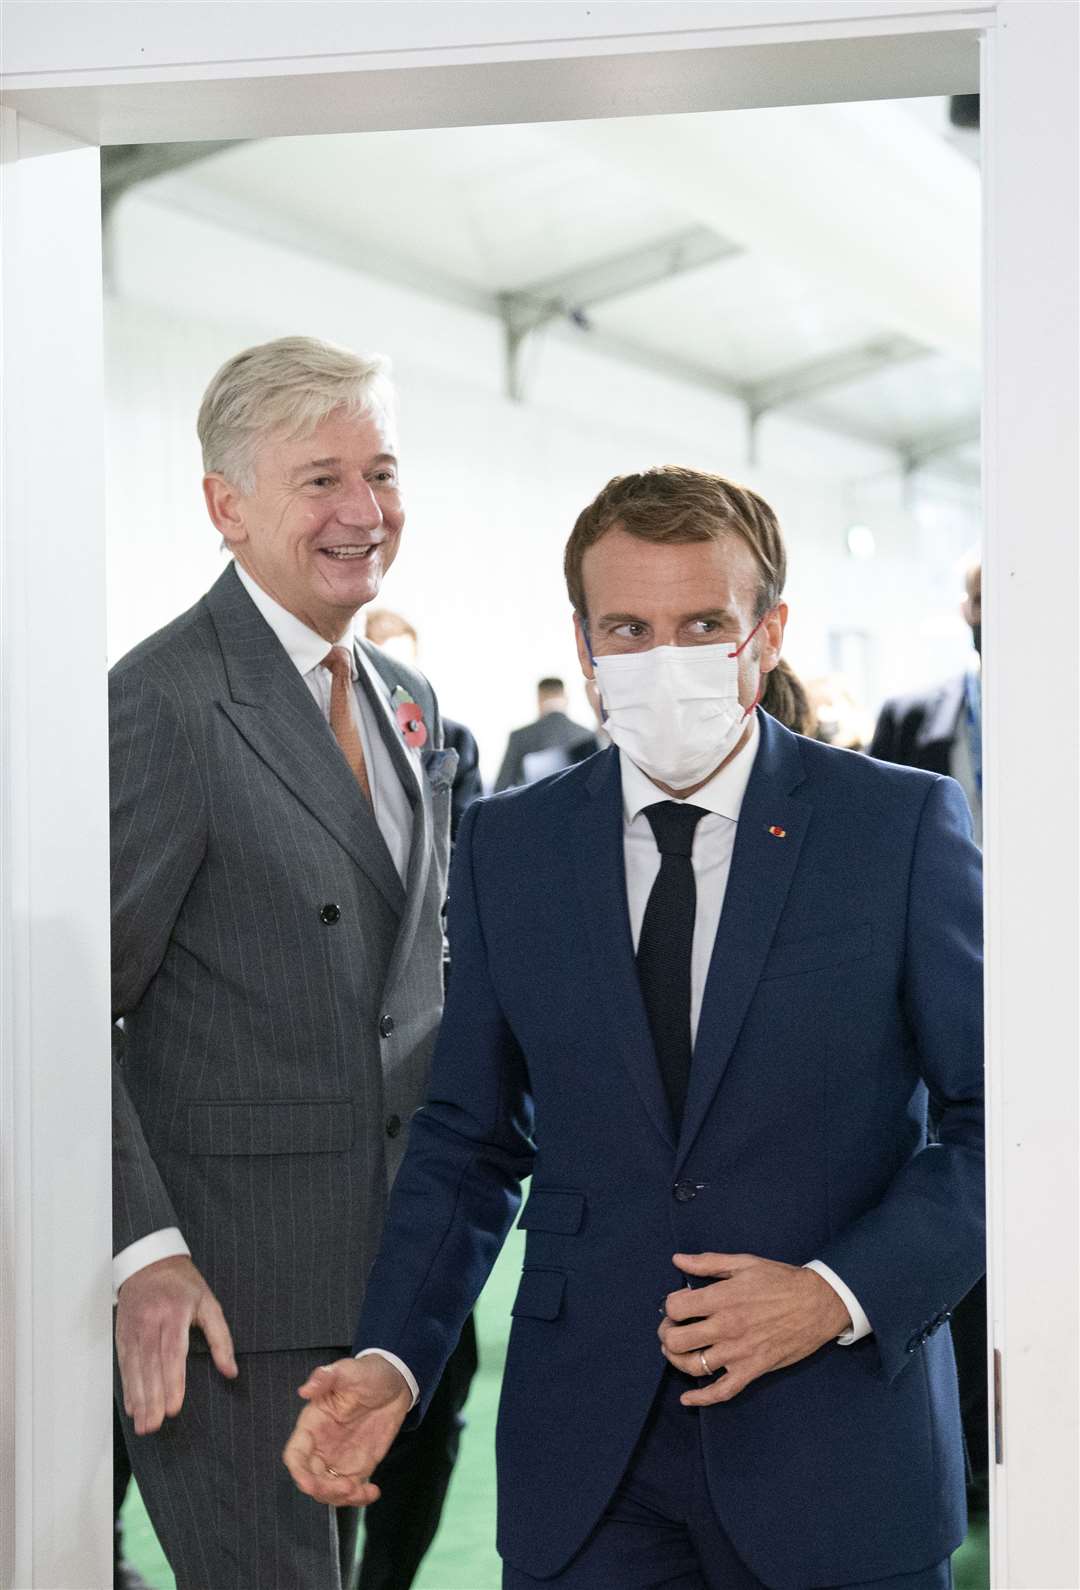 Clive Alderton (left) with the French president Emmanuel Macron at Cop26 in 2021 (Jane Barlow/PA)